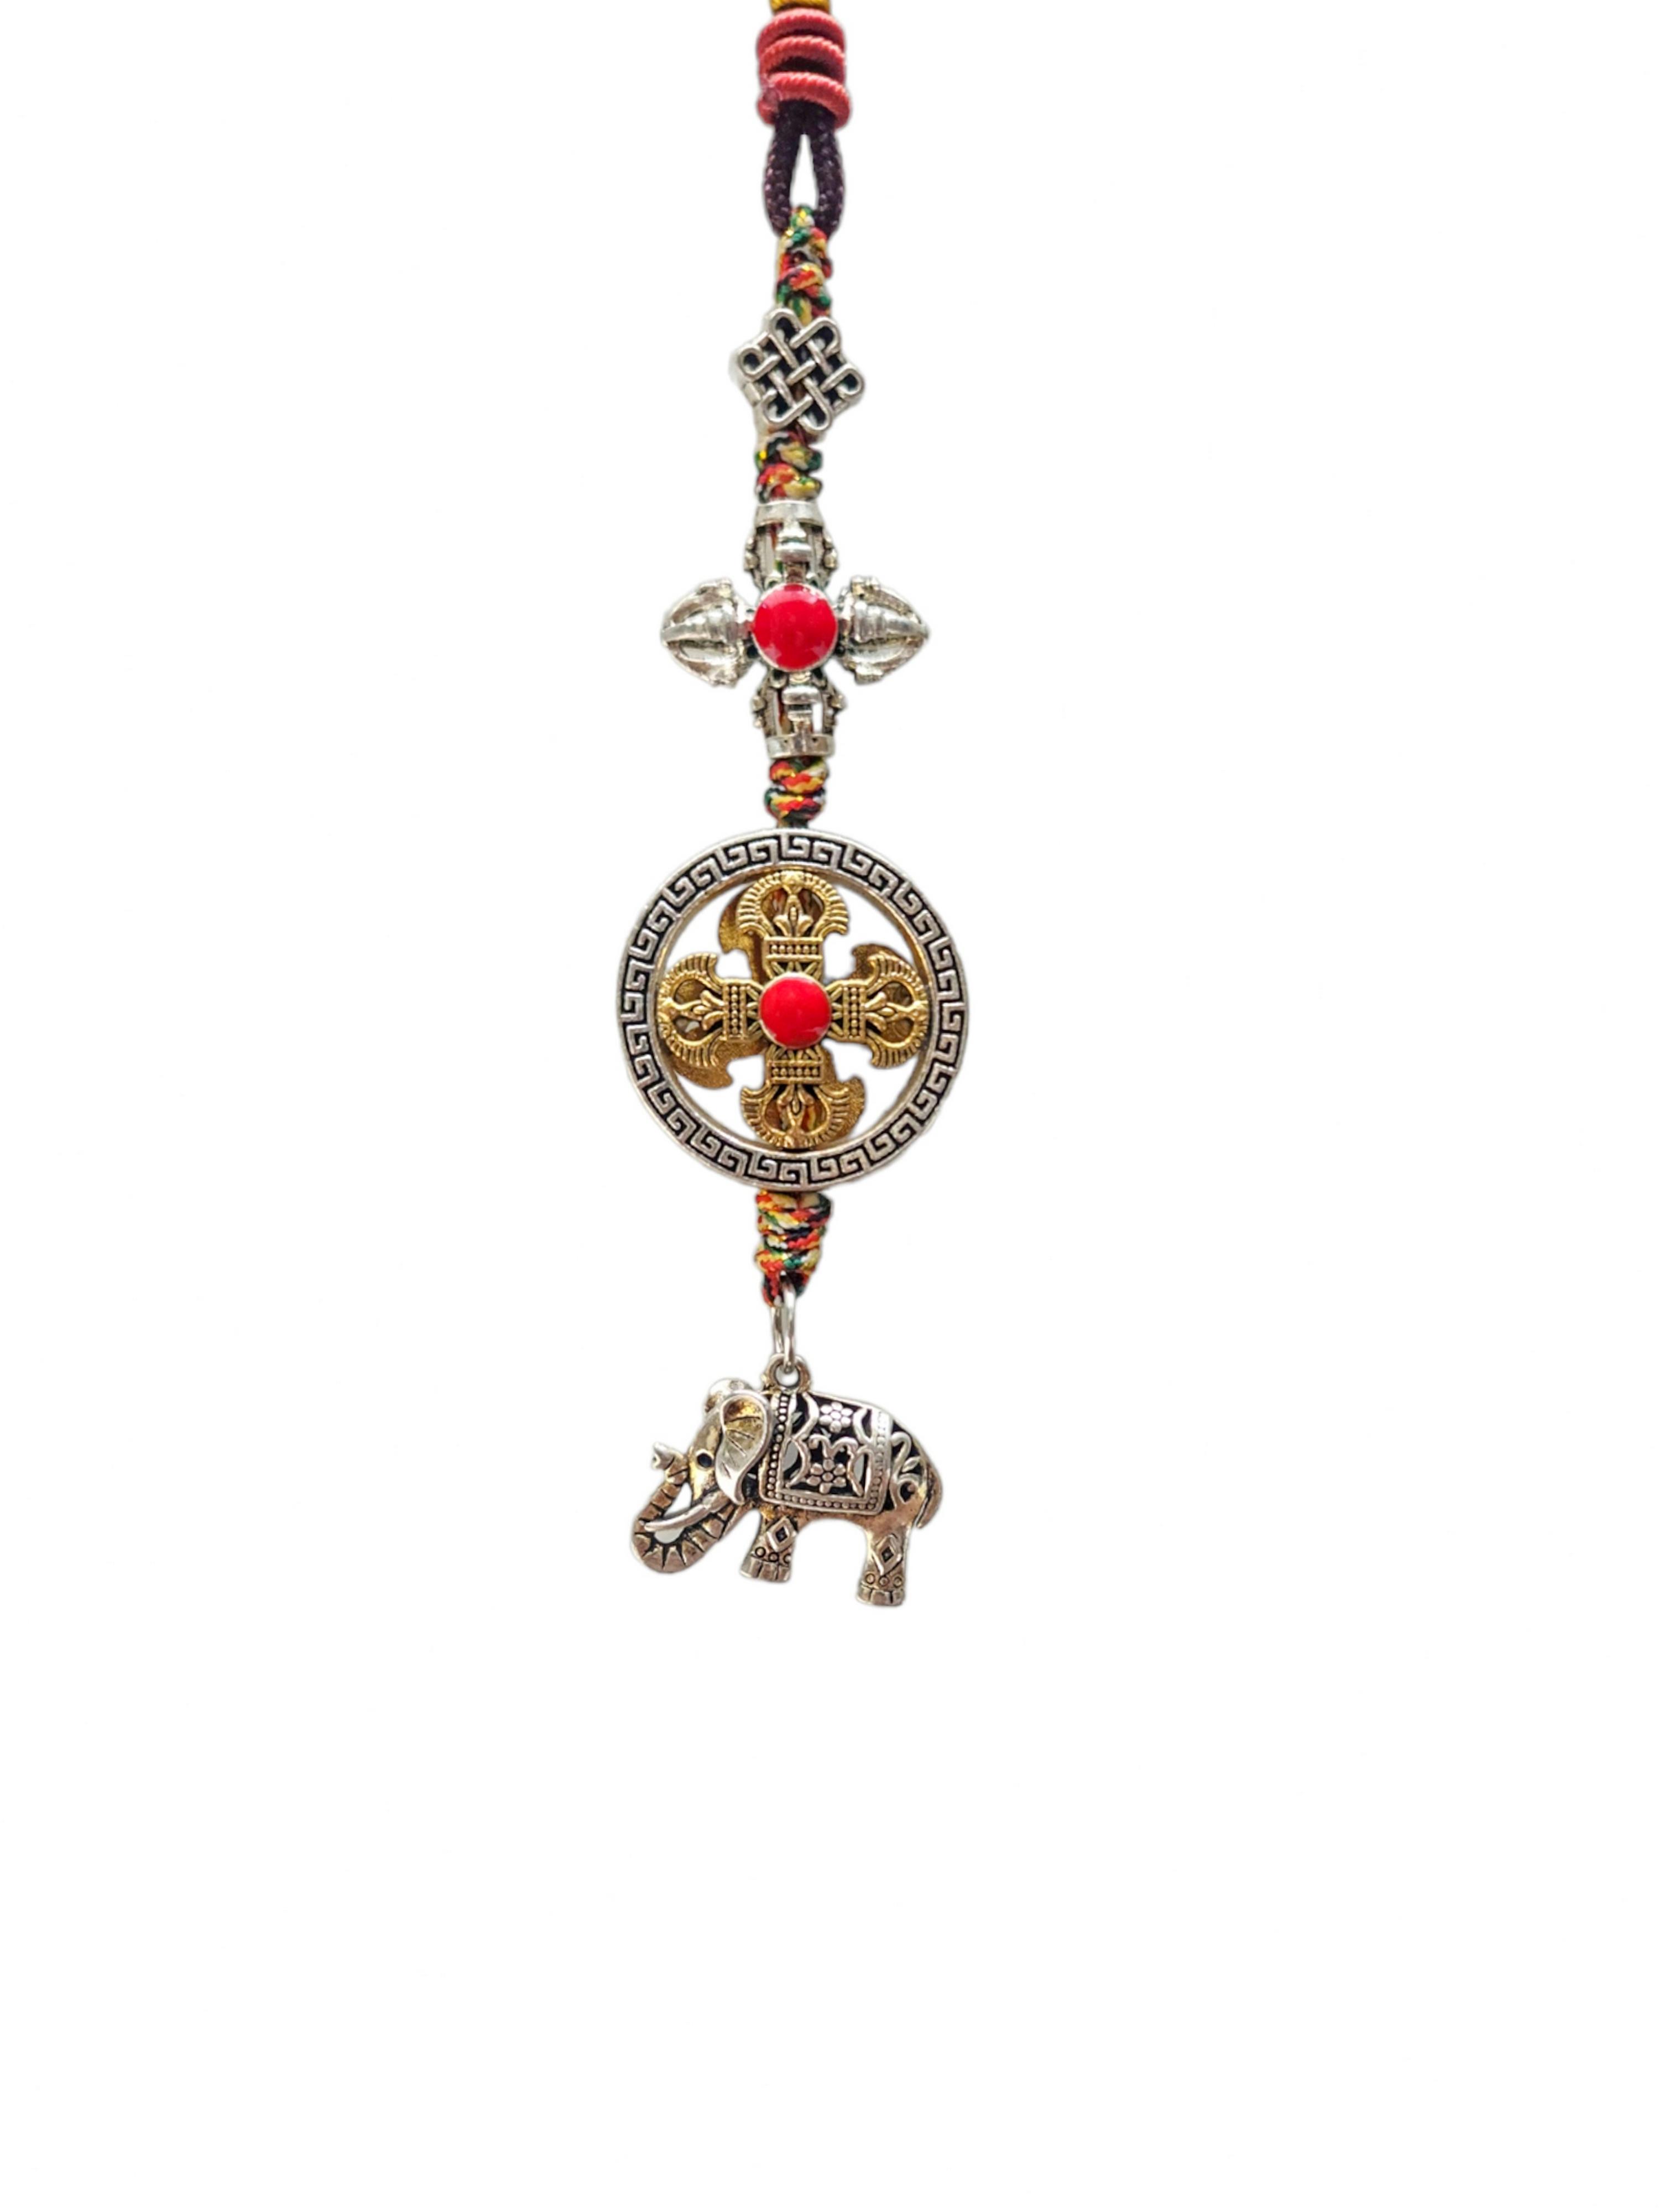 Buddhist Ritual Amulet Hanging With Double Dorje And Elephant, For Wall, Altar, Bags And Keyring